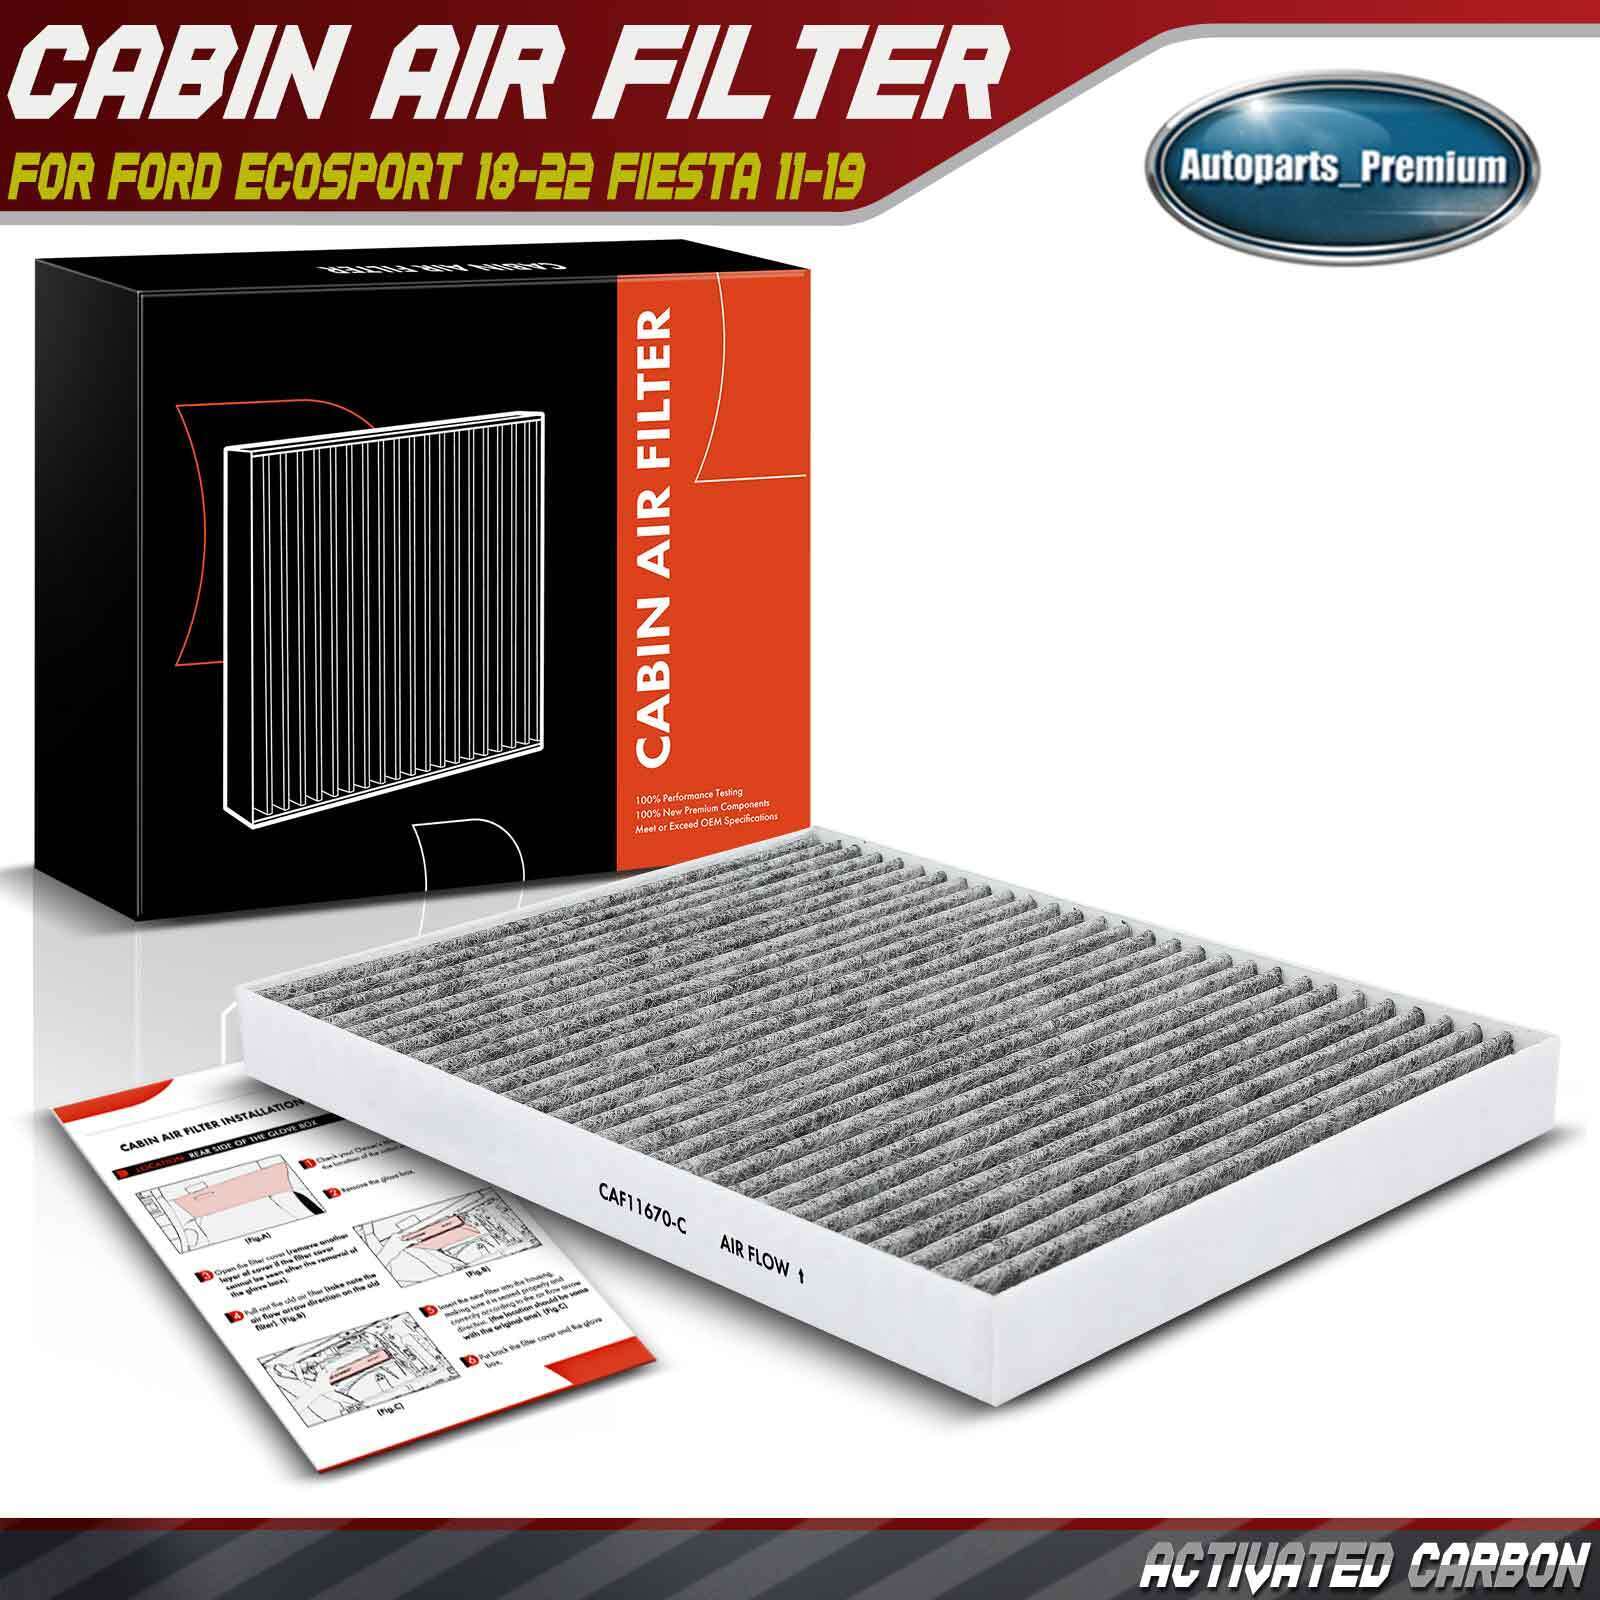 Activated Carbon Cabin Air Filter for Ford EcoSport 2018-2022 Fiesta 2011-2019